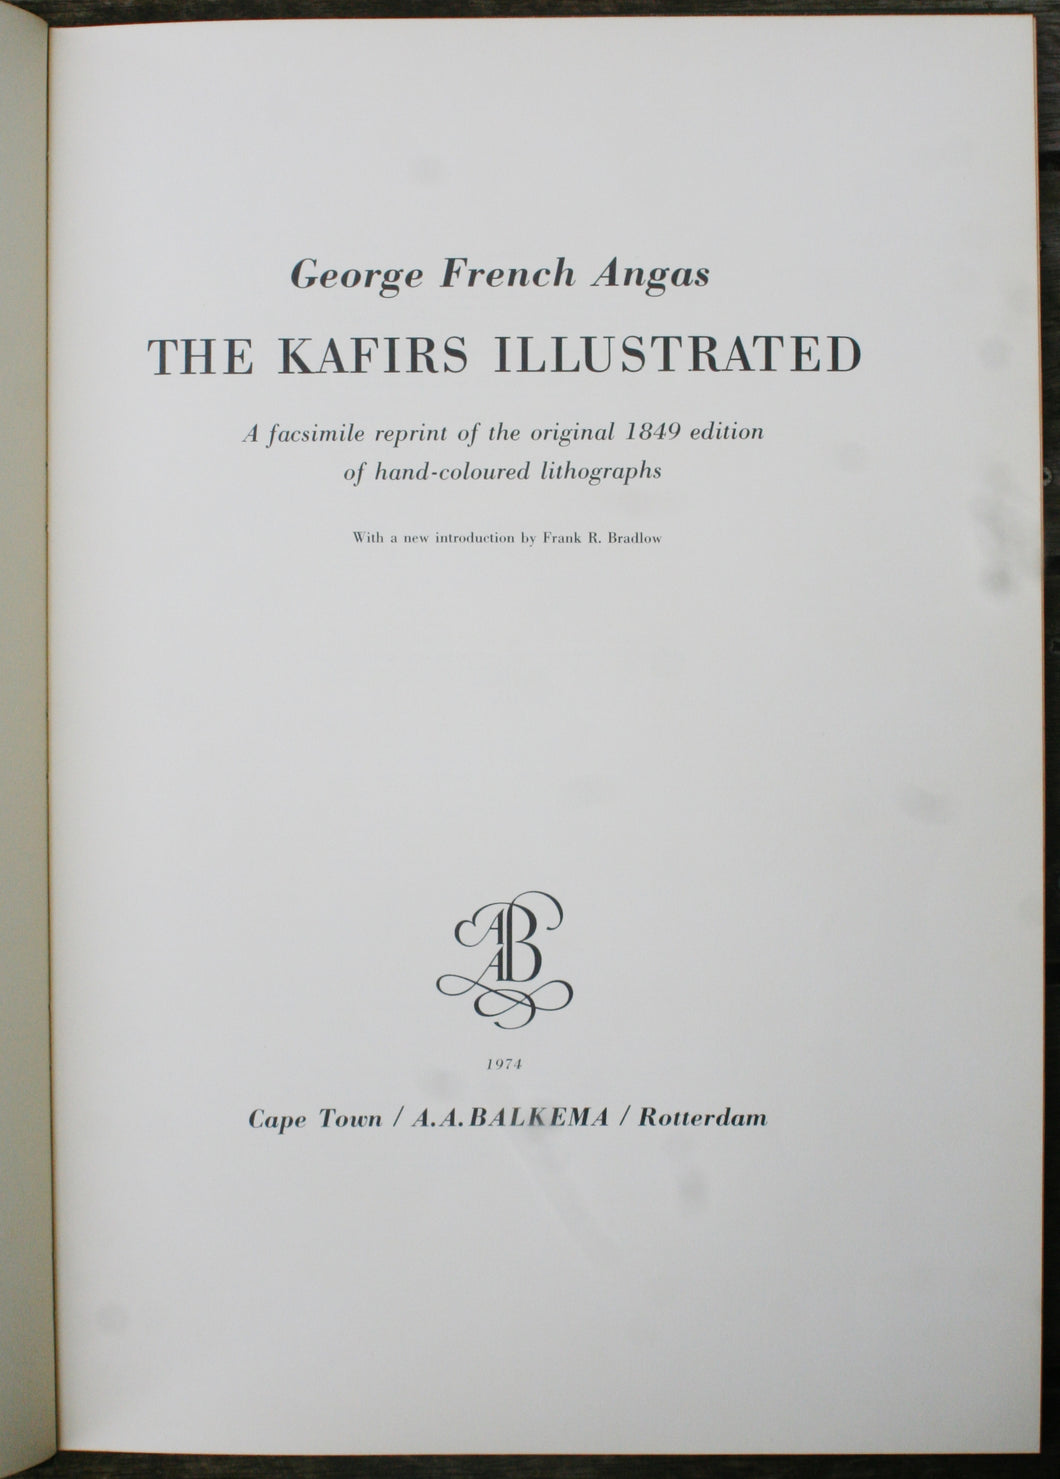 The Kaffirs Illustrated, by George French Angas (1974 Reprint)